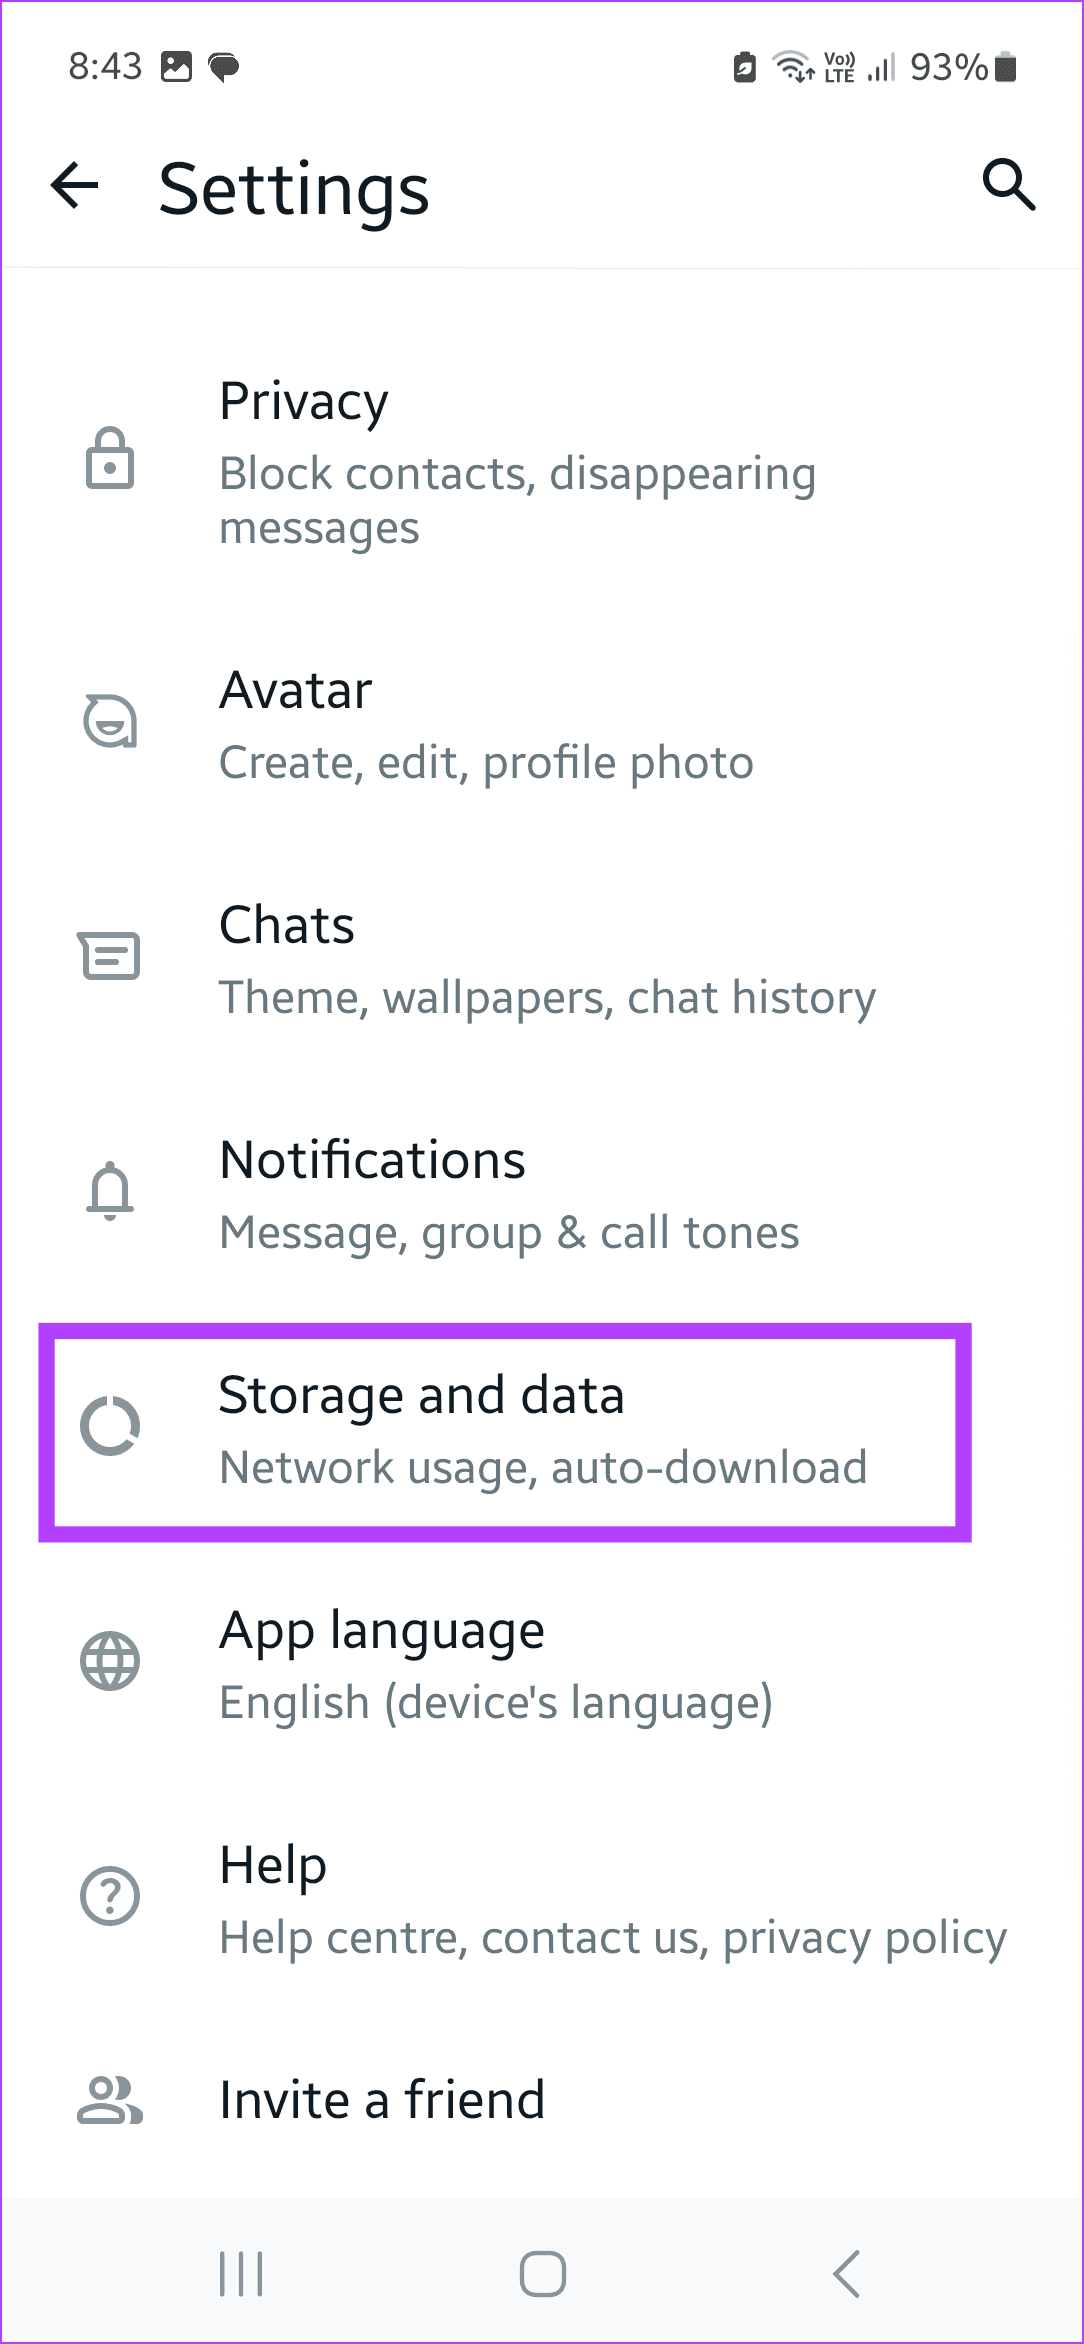 Tap on Storage and data